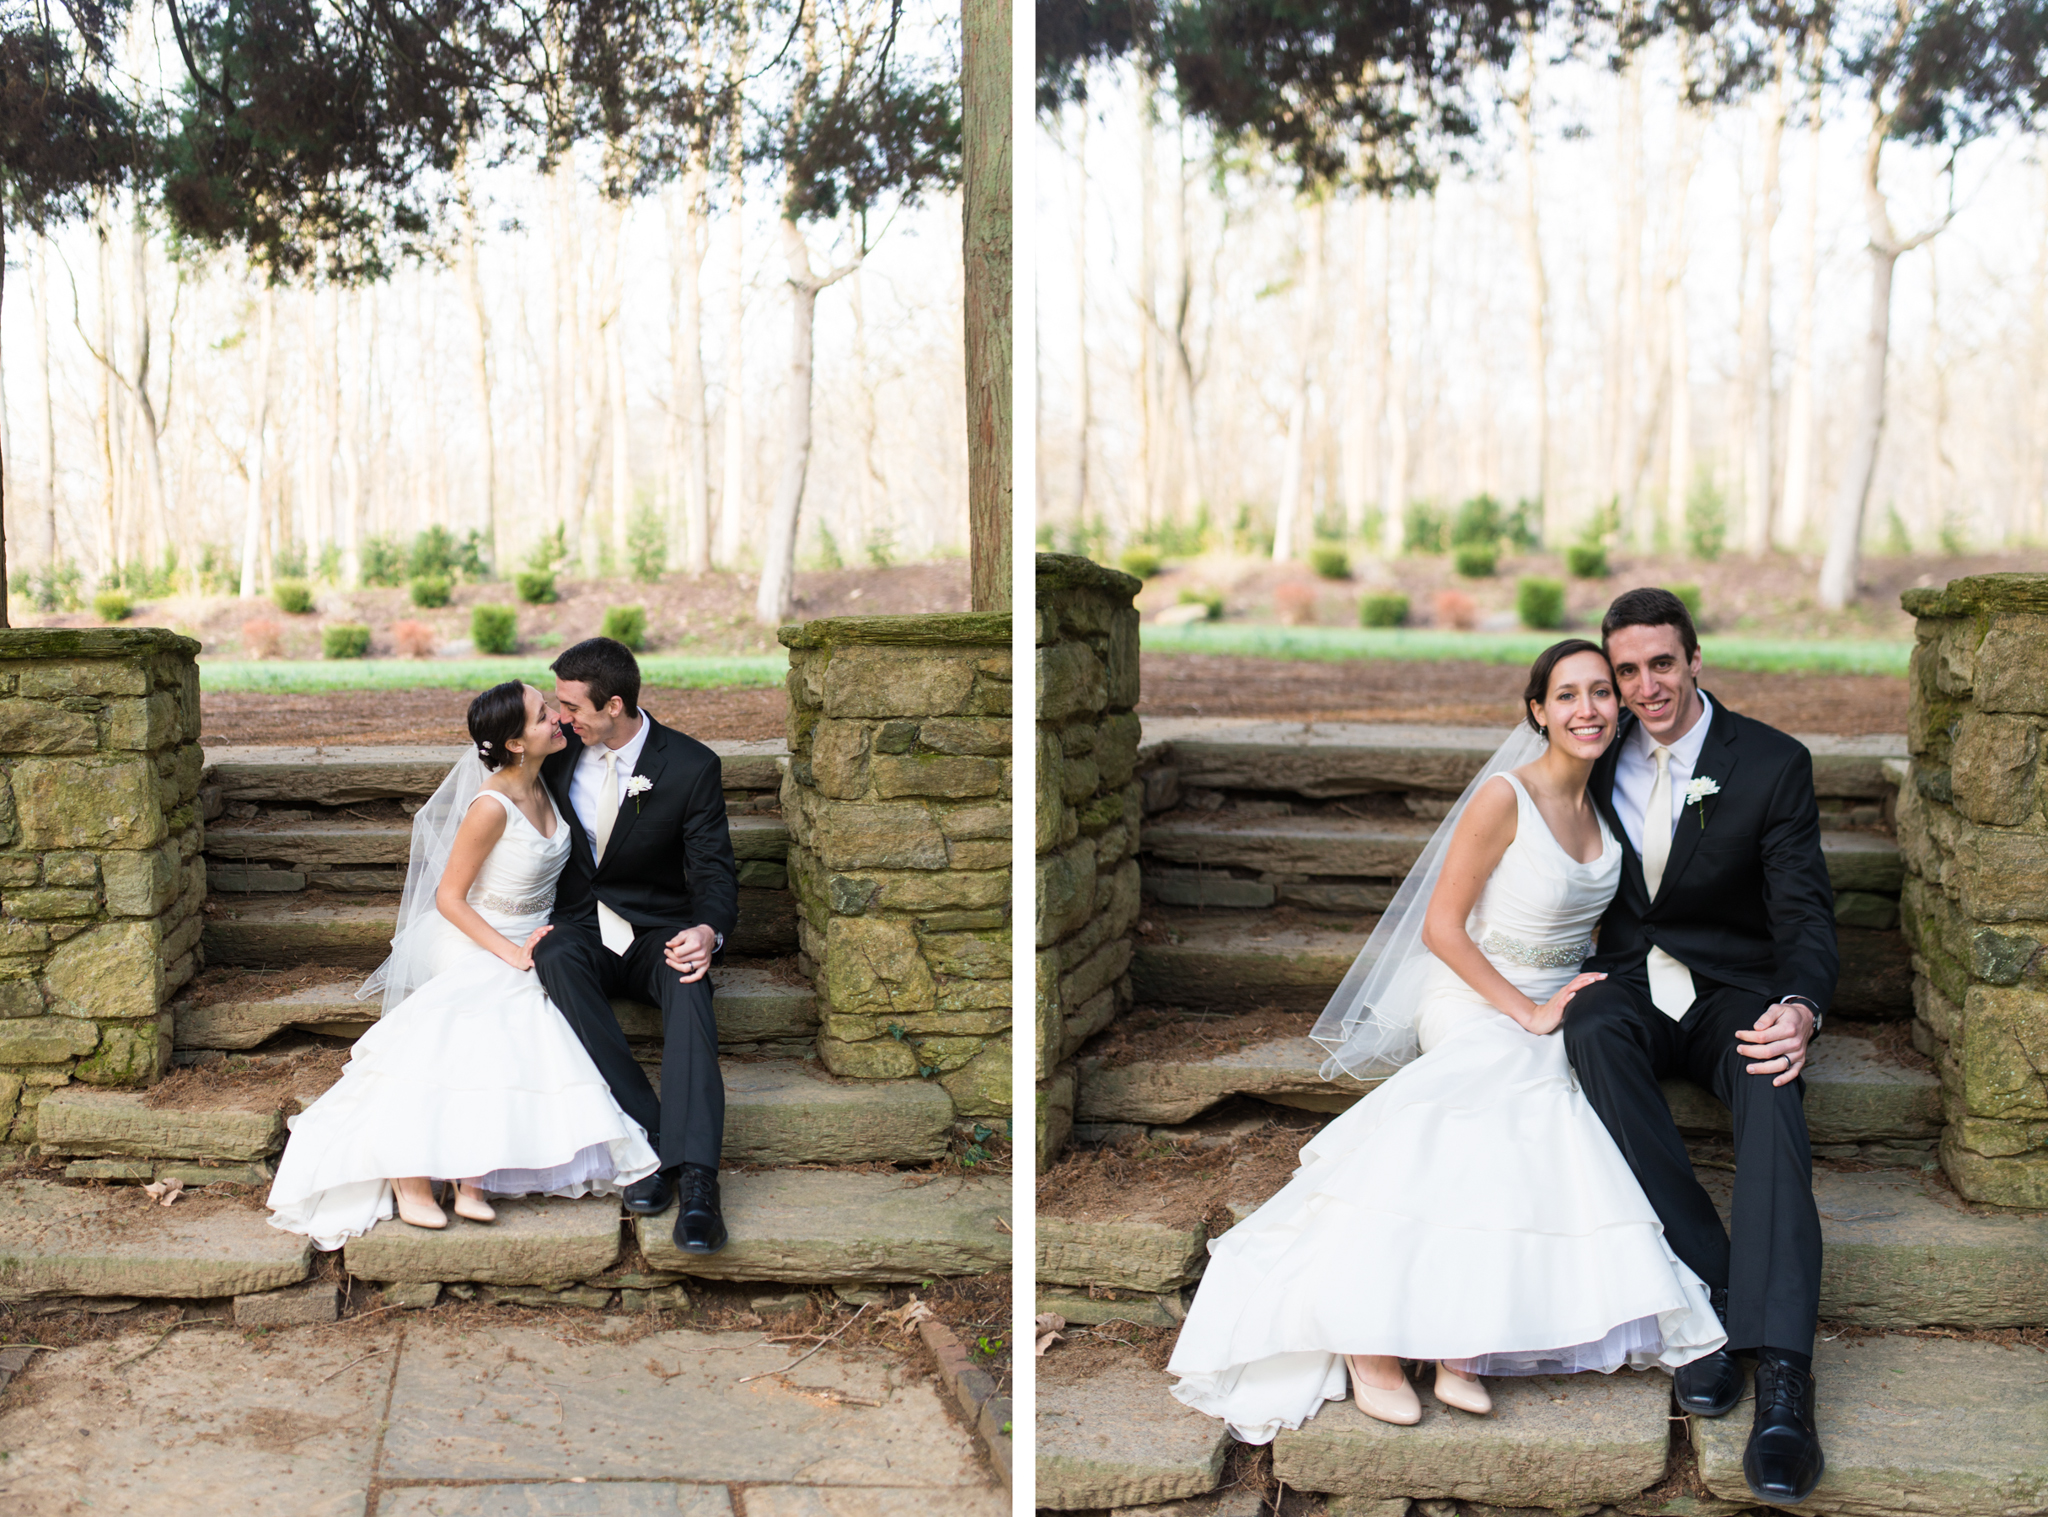 Maralize + Jesse - Ridley Creek State Park Anniversary Session - Alison Dunn Photography photo-7